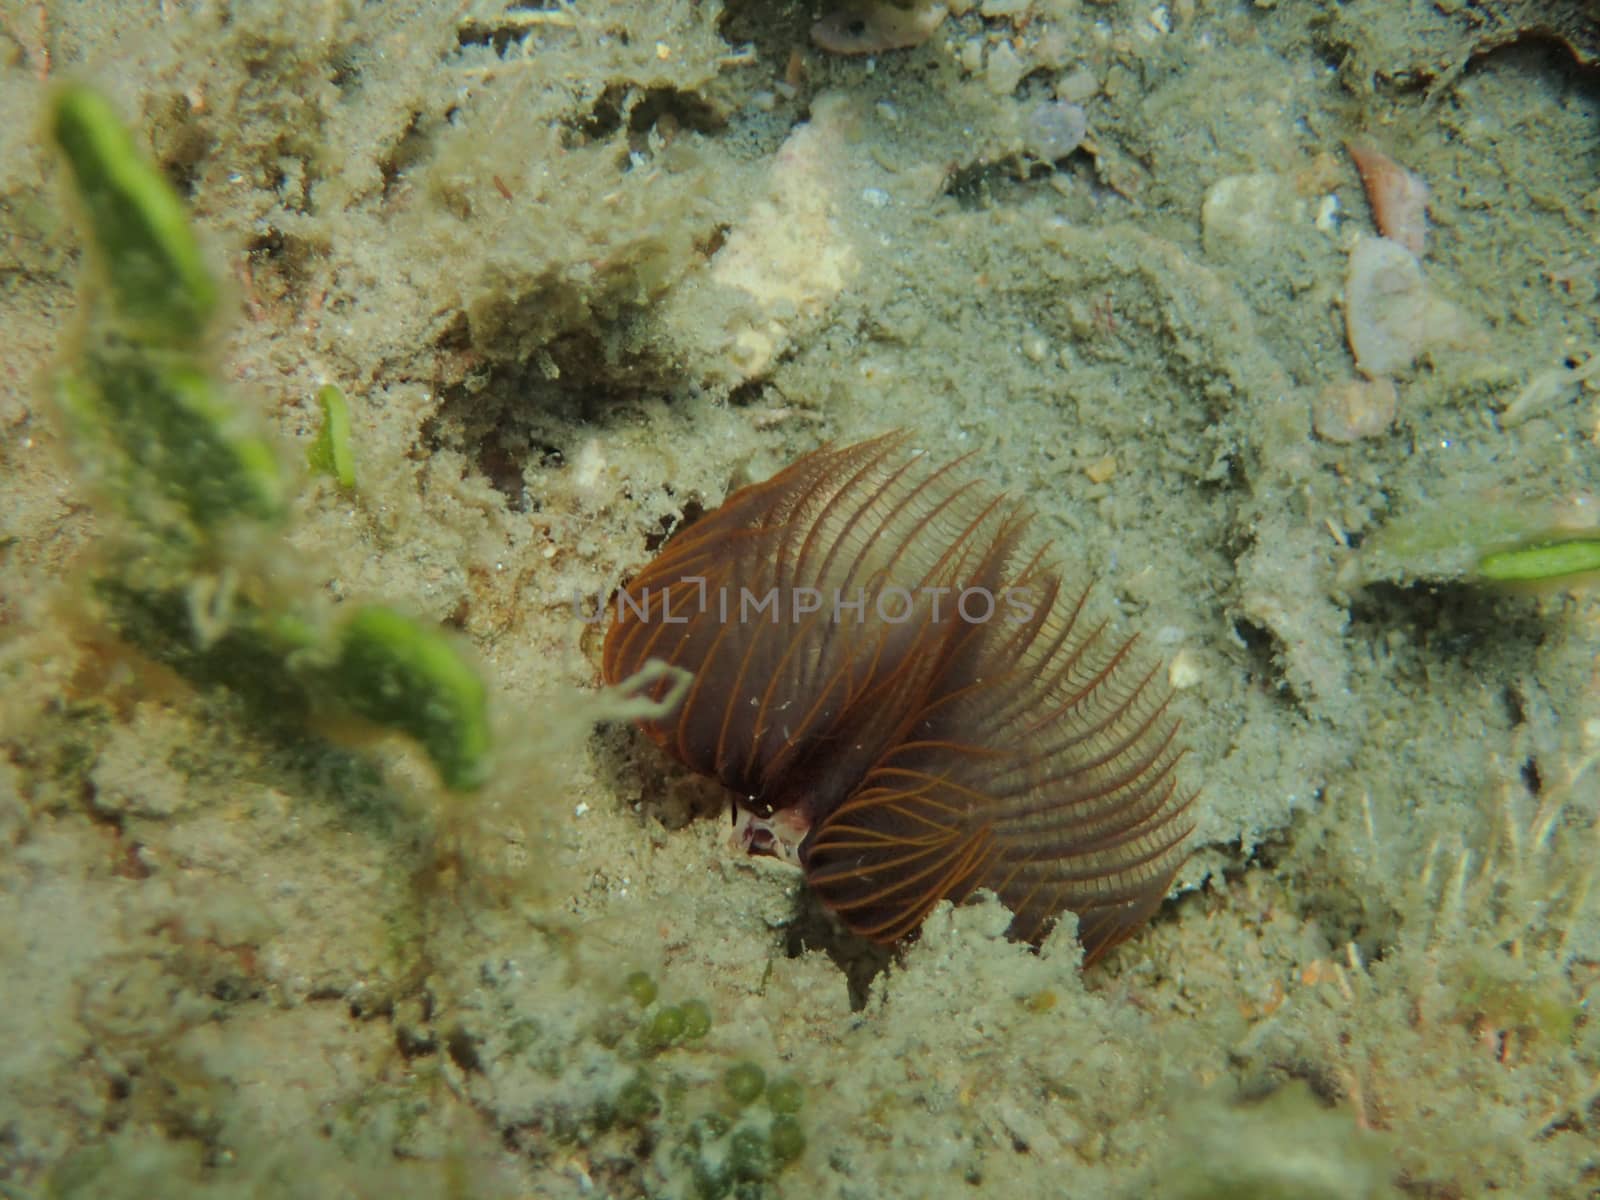 An underwater photo of a Feather Duster Worm by Jshanebutt